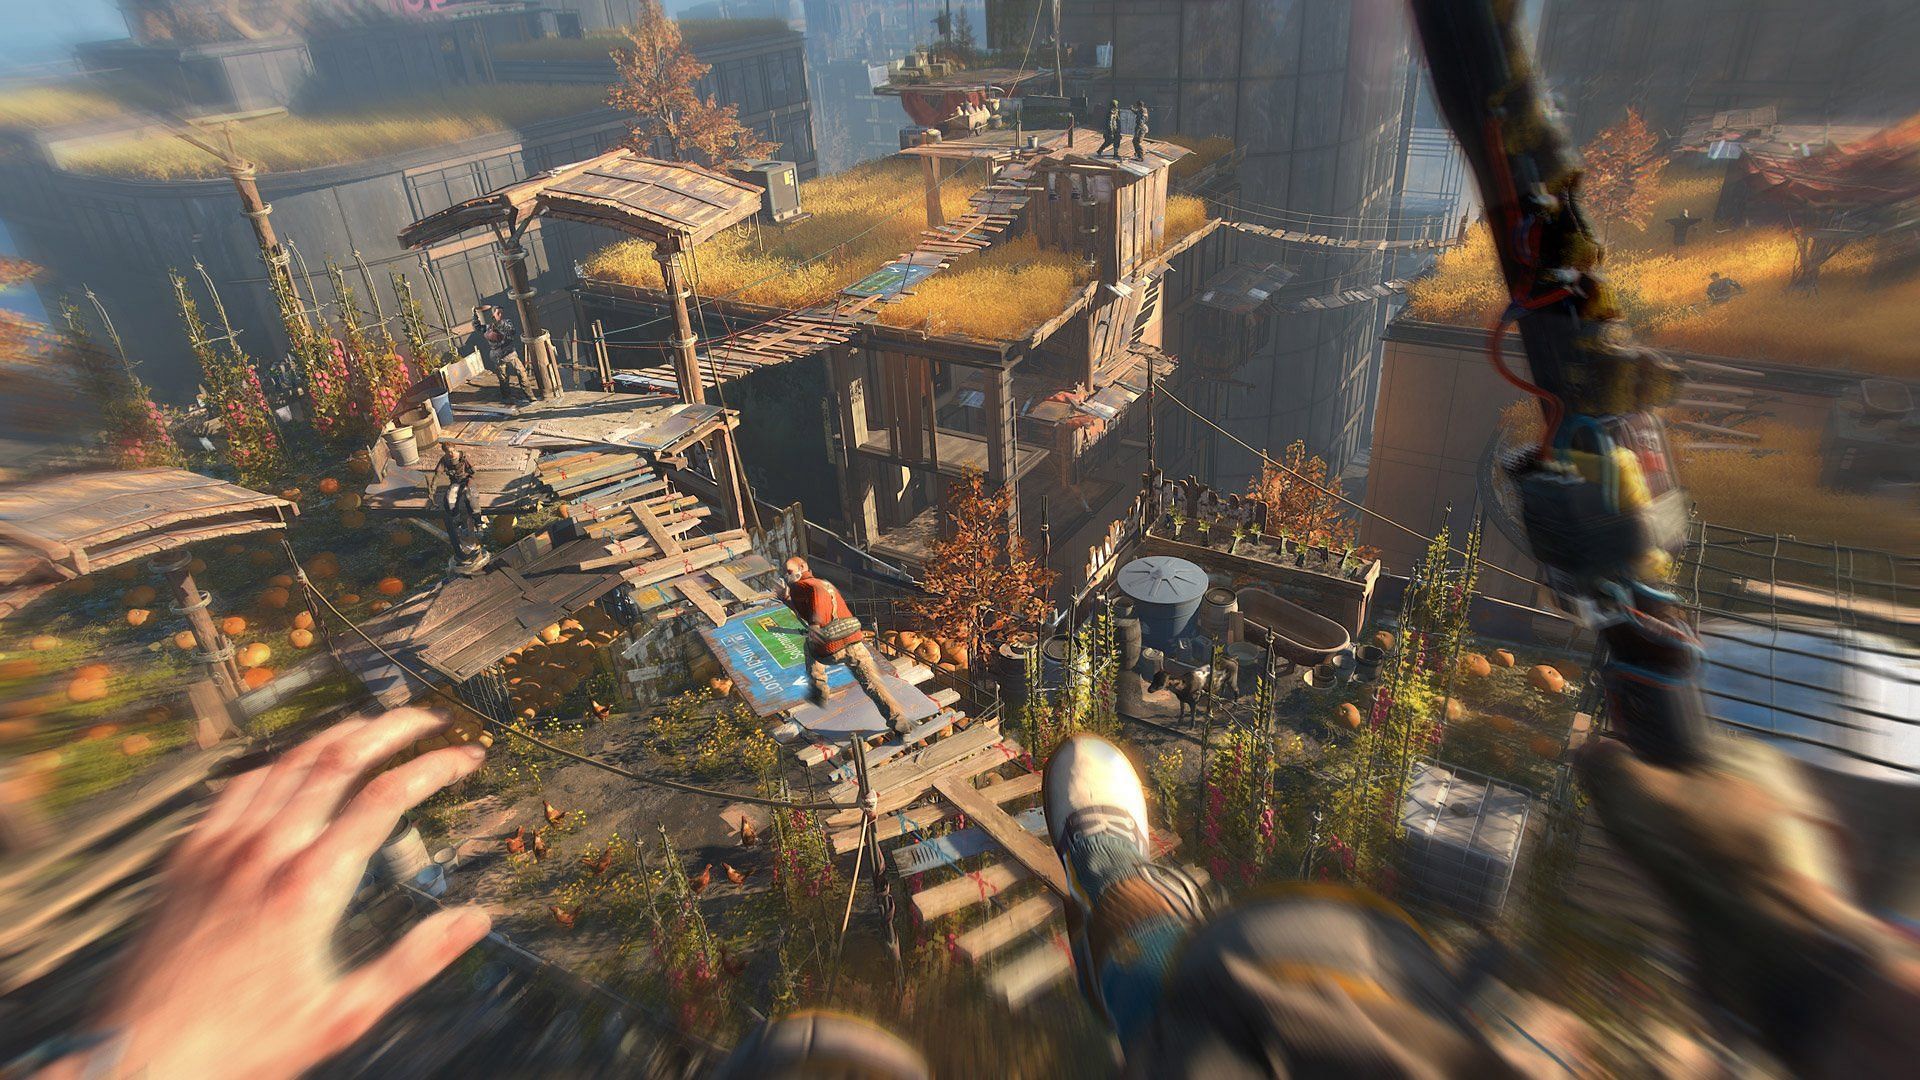 Dying Light 2 also includes DLSS and FSR, as well as its own Linear upscaling (Image via PlayStation)